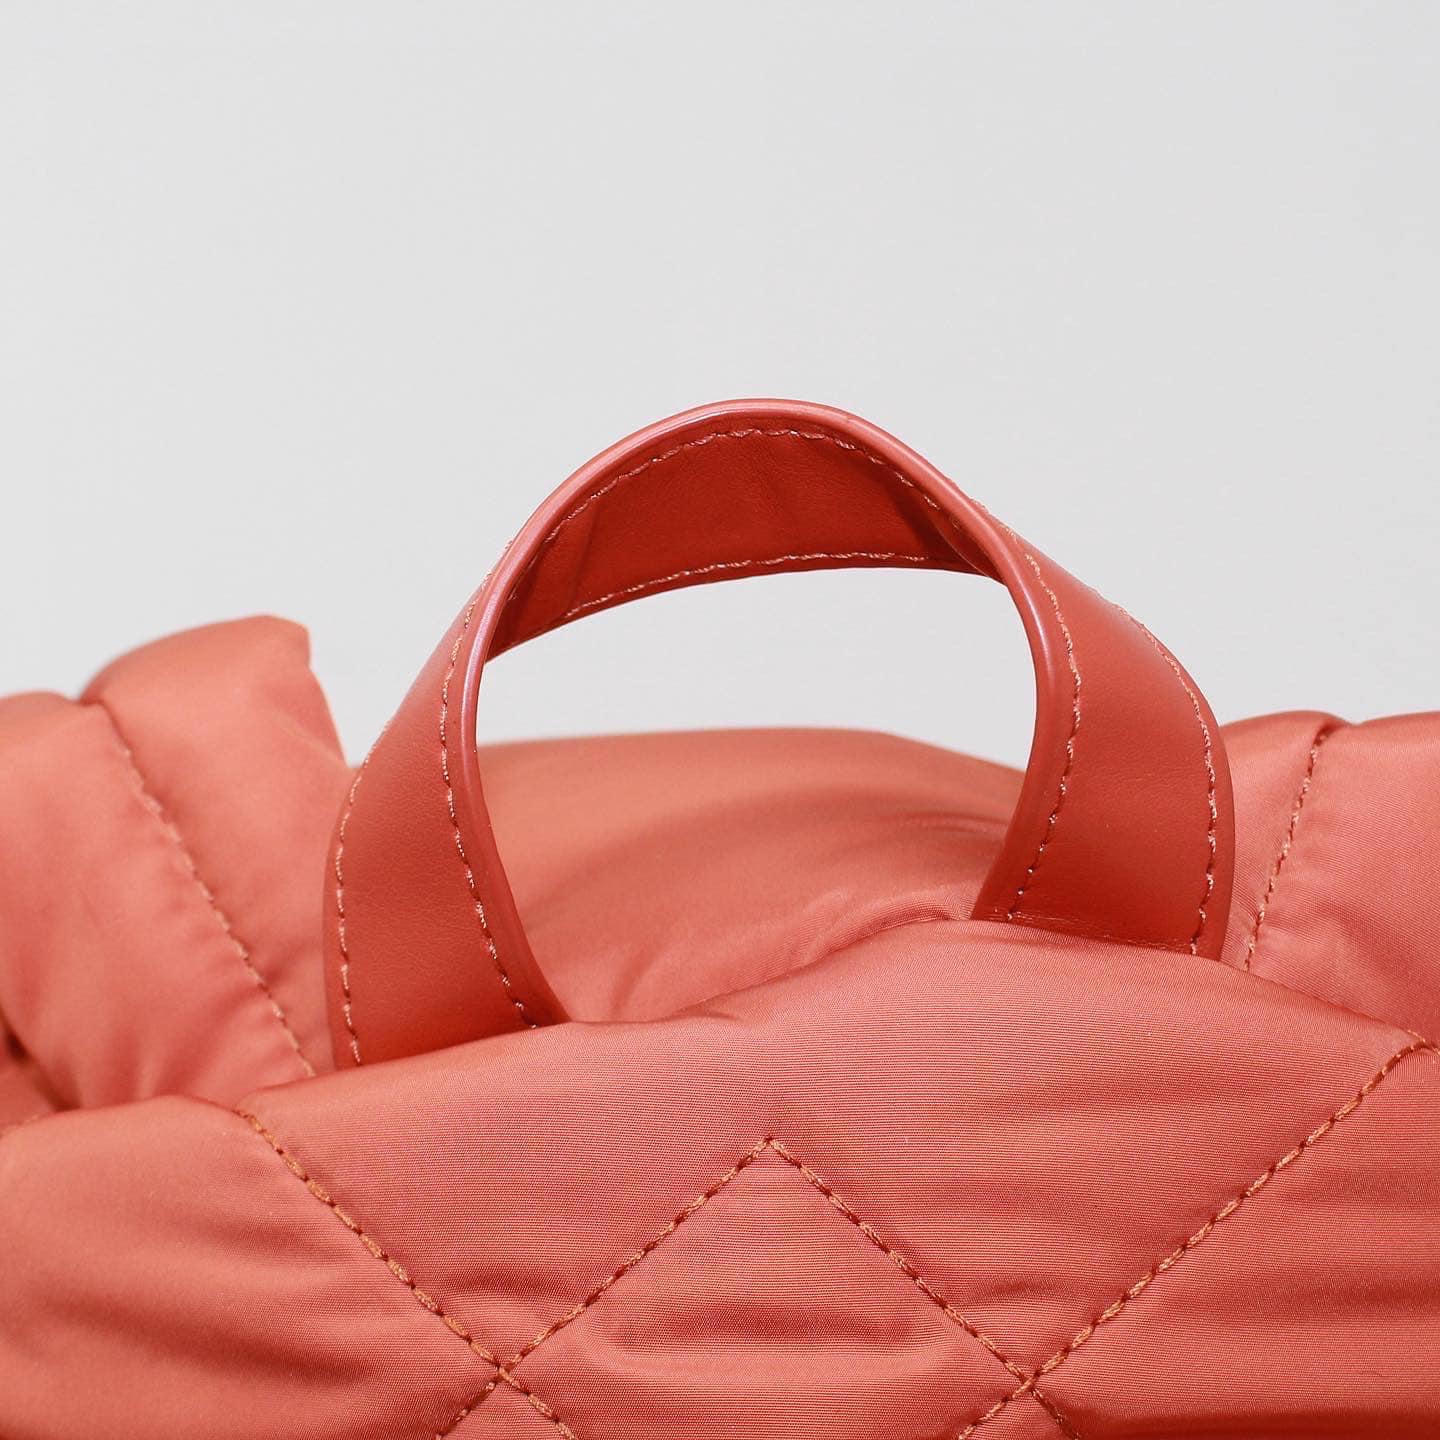 Marc Jacobs Quilted Nylon Mini Backpack